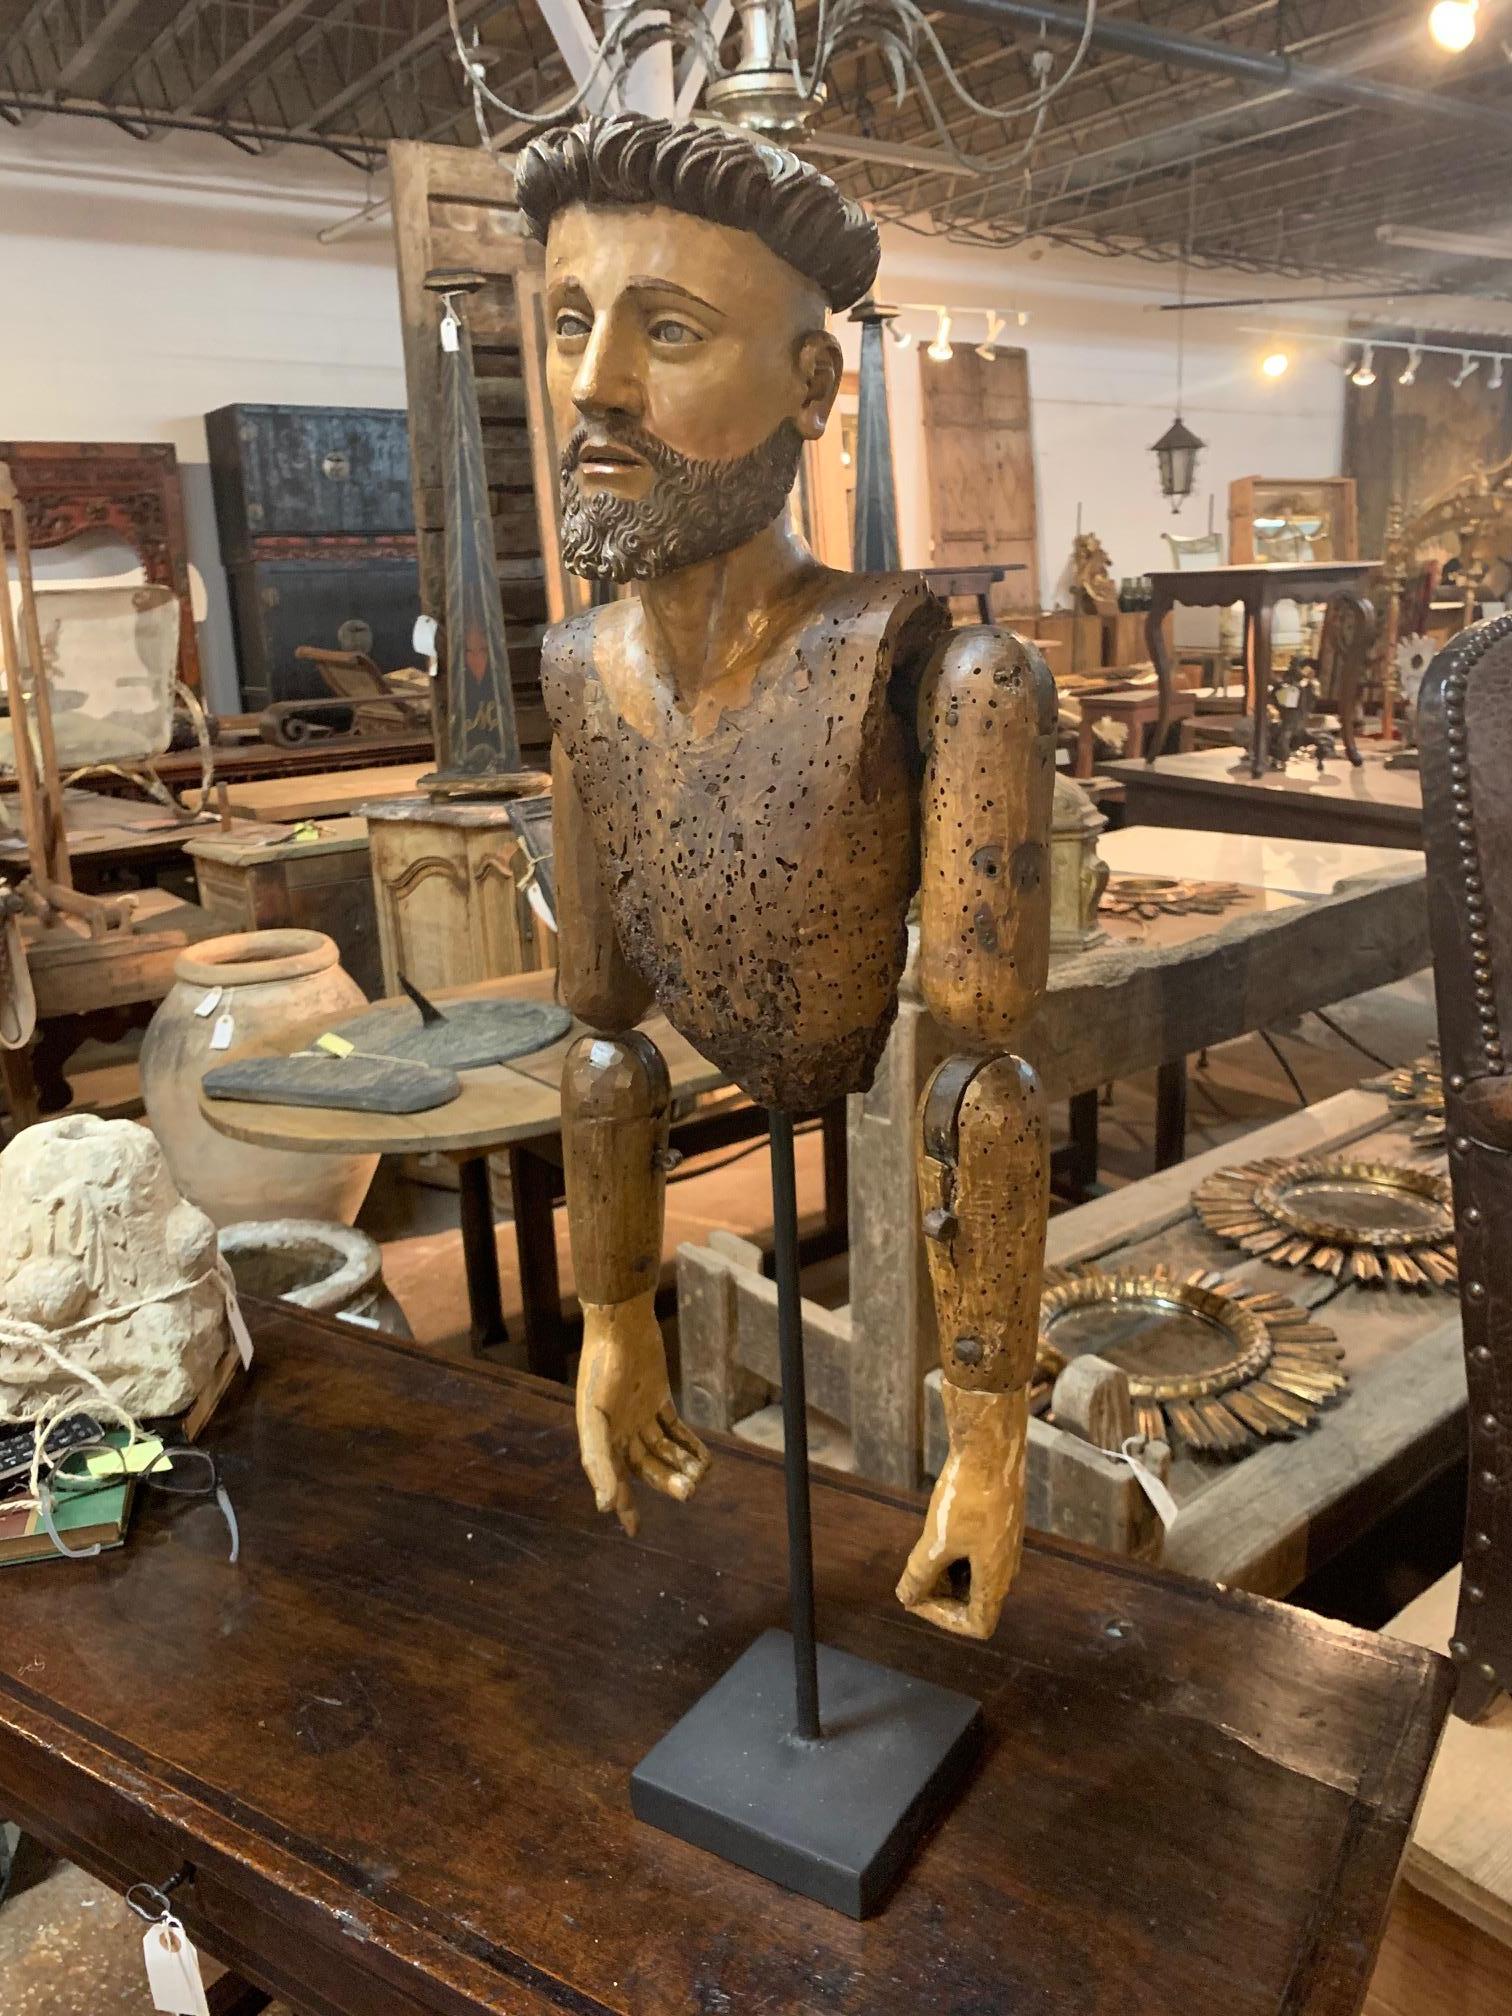 An excellent 17th century Spanish Santo fragment - the head and torso - in hand carved polychromed wood. A wonderful art piece now mounted on a custom iron presentation stand.